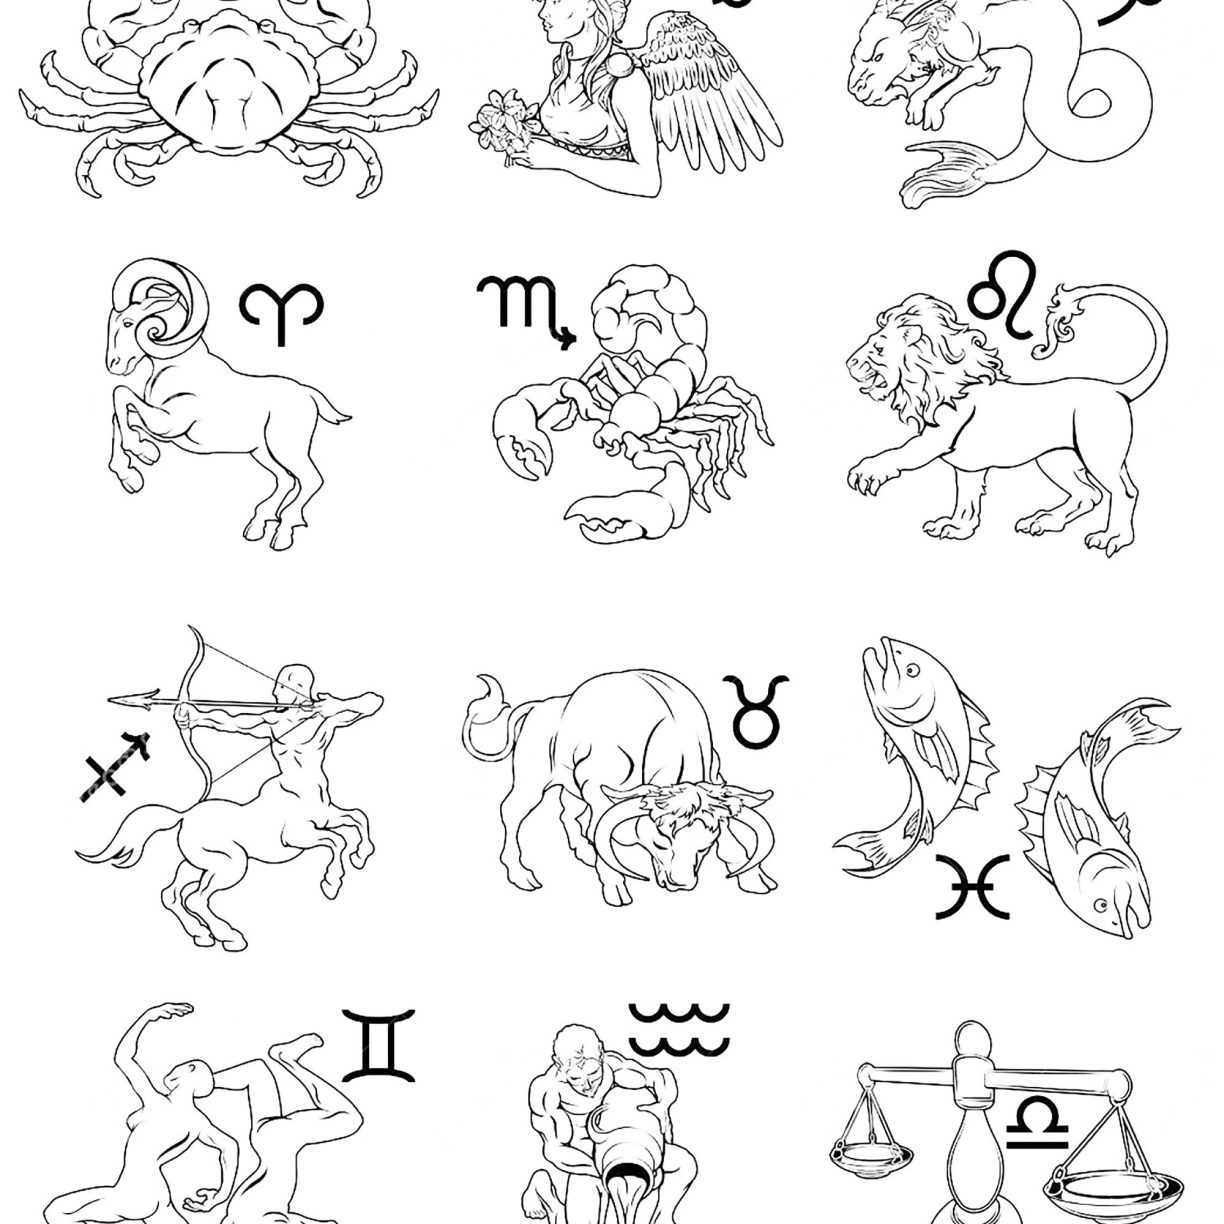 Zodiac Signs Coloring Pages at GetDrawings | Free download